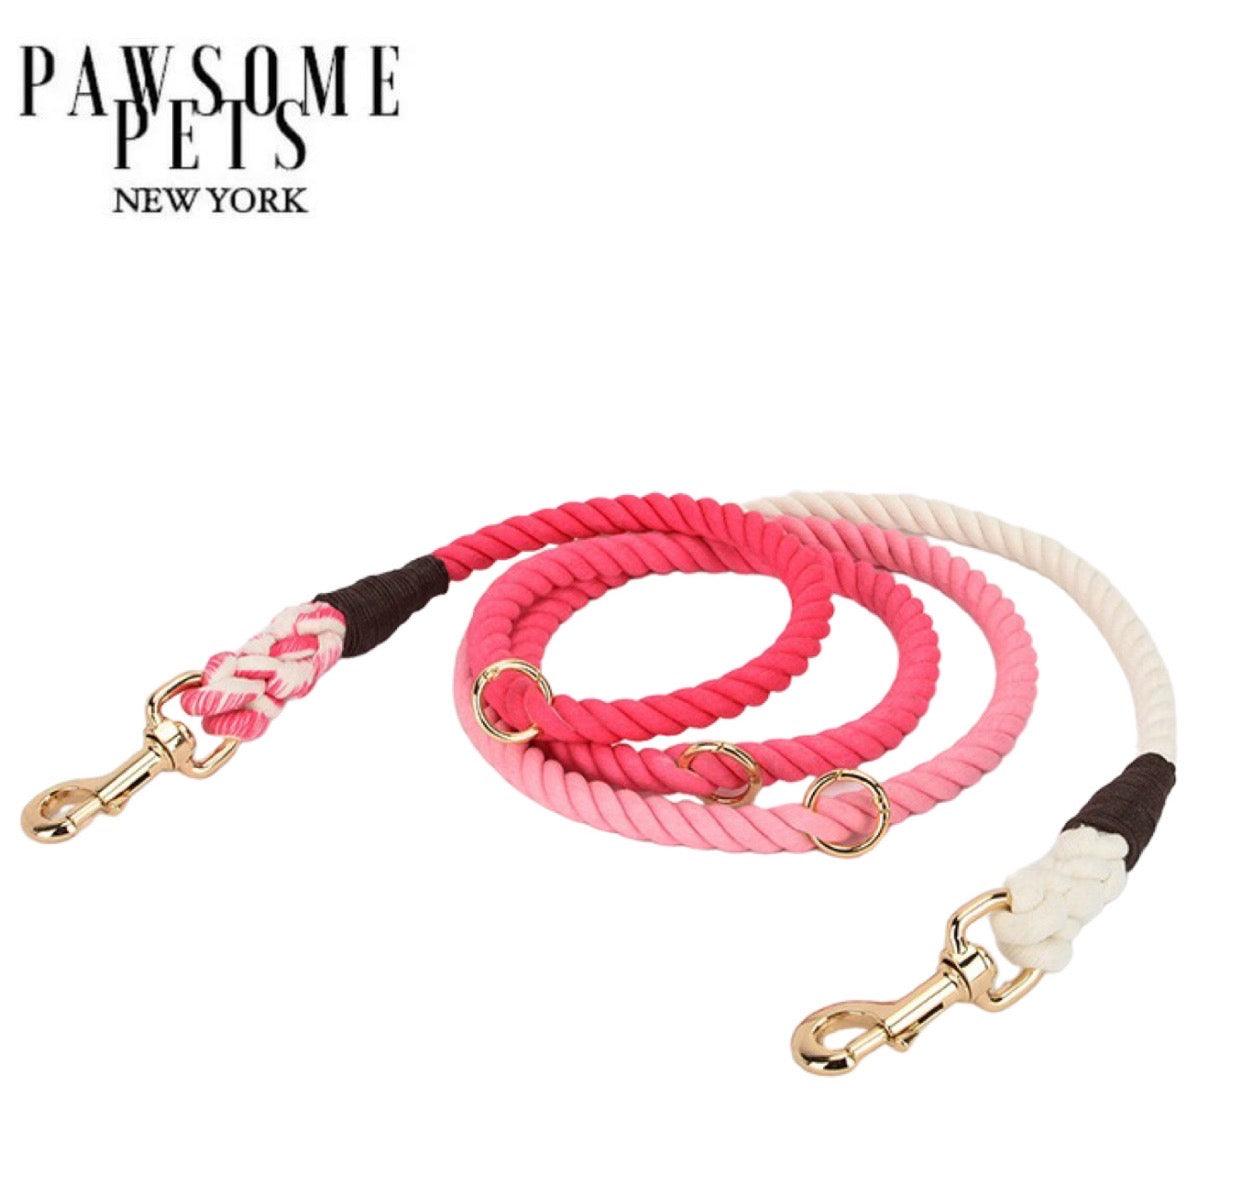 HANDS FREE DOG ROPE LEASH - OMBRE ROSE PINK - Pawsomepetsnewyork